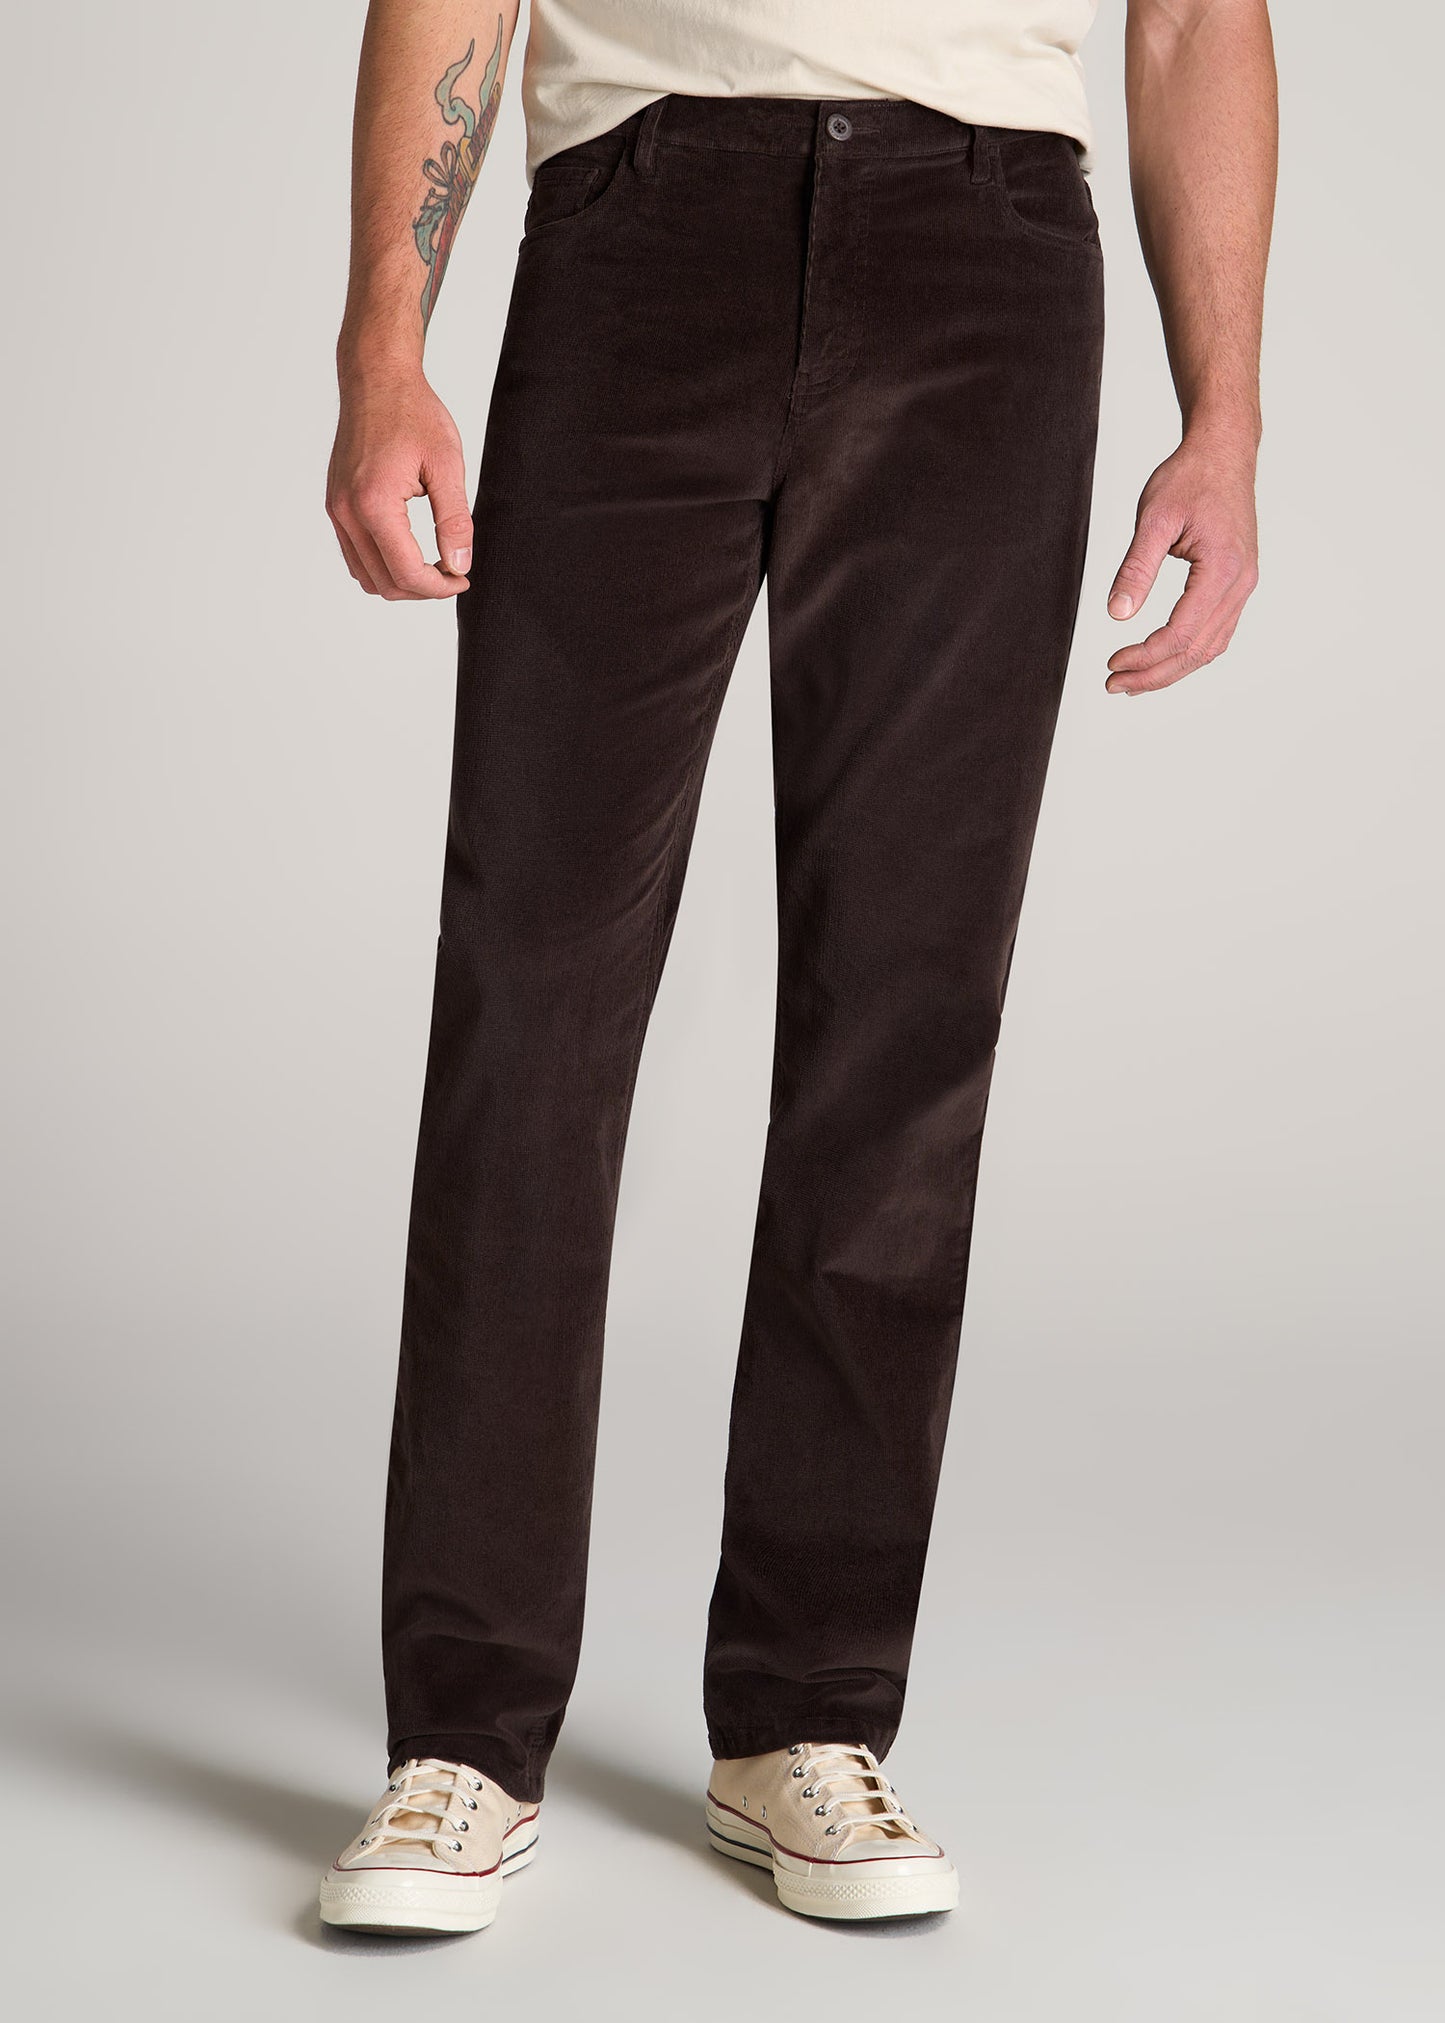 Tall man wearing American Tall's 5 Pocket Stretch Corduroy in Chocolate.